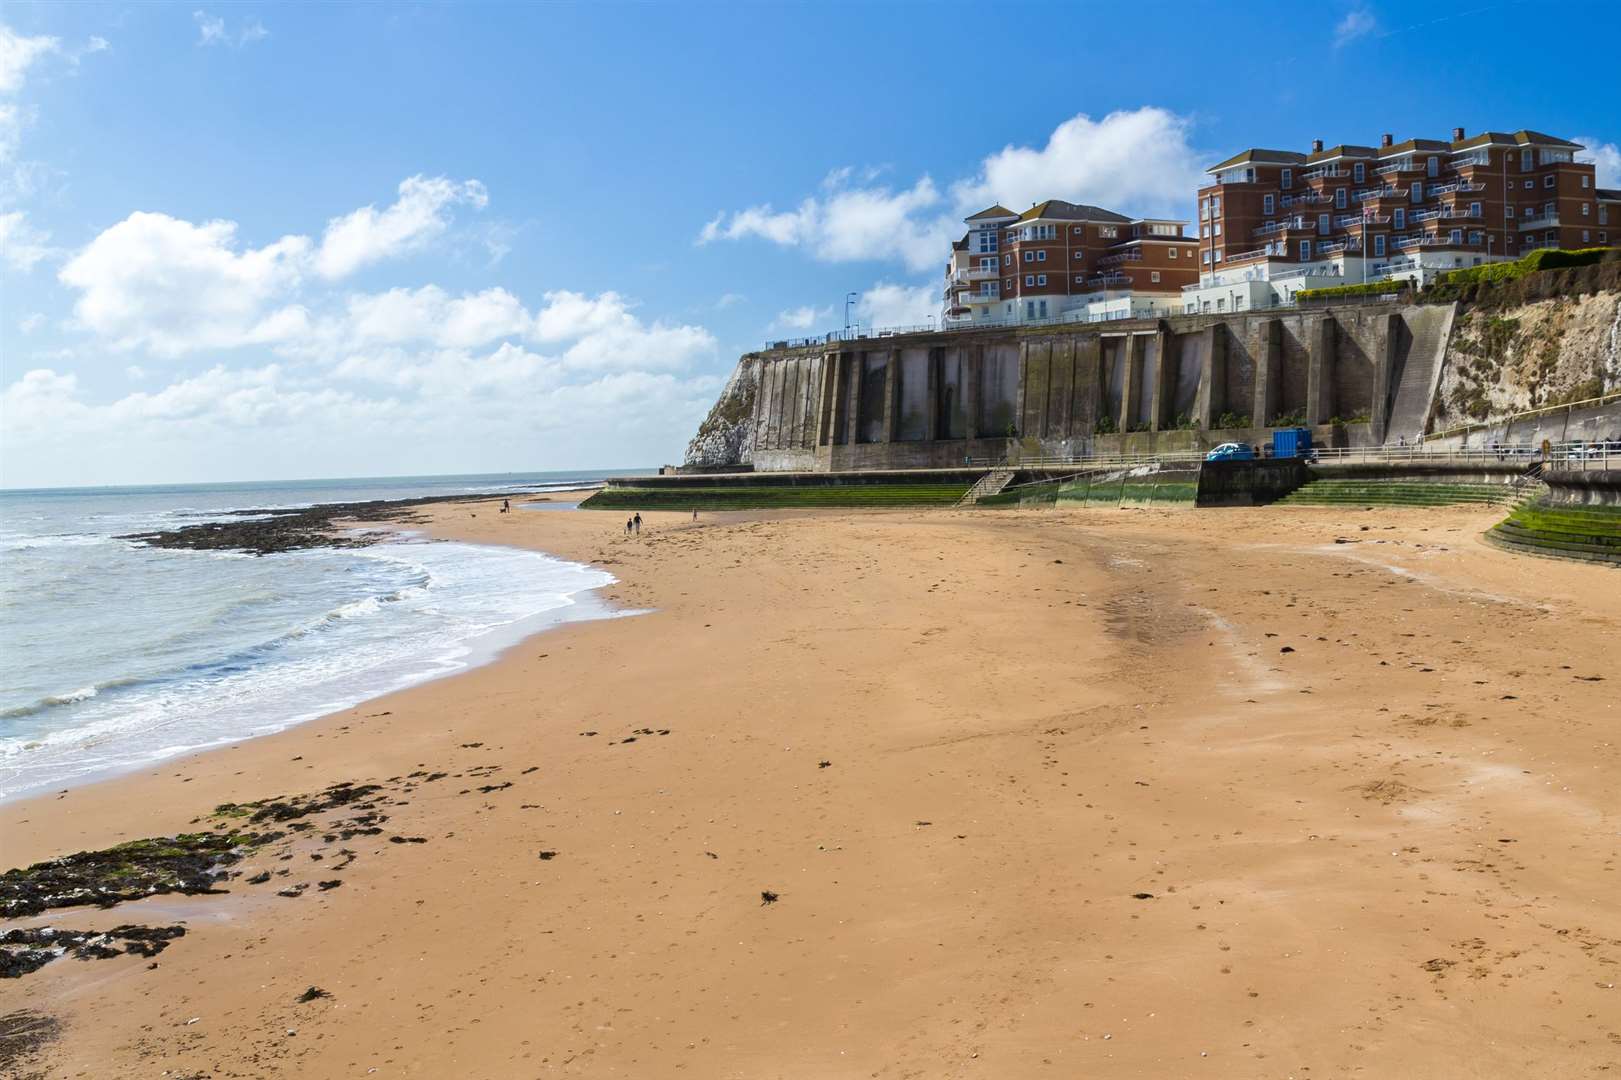 Broadstairs is packed with beaches